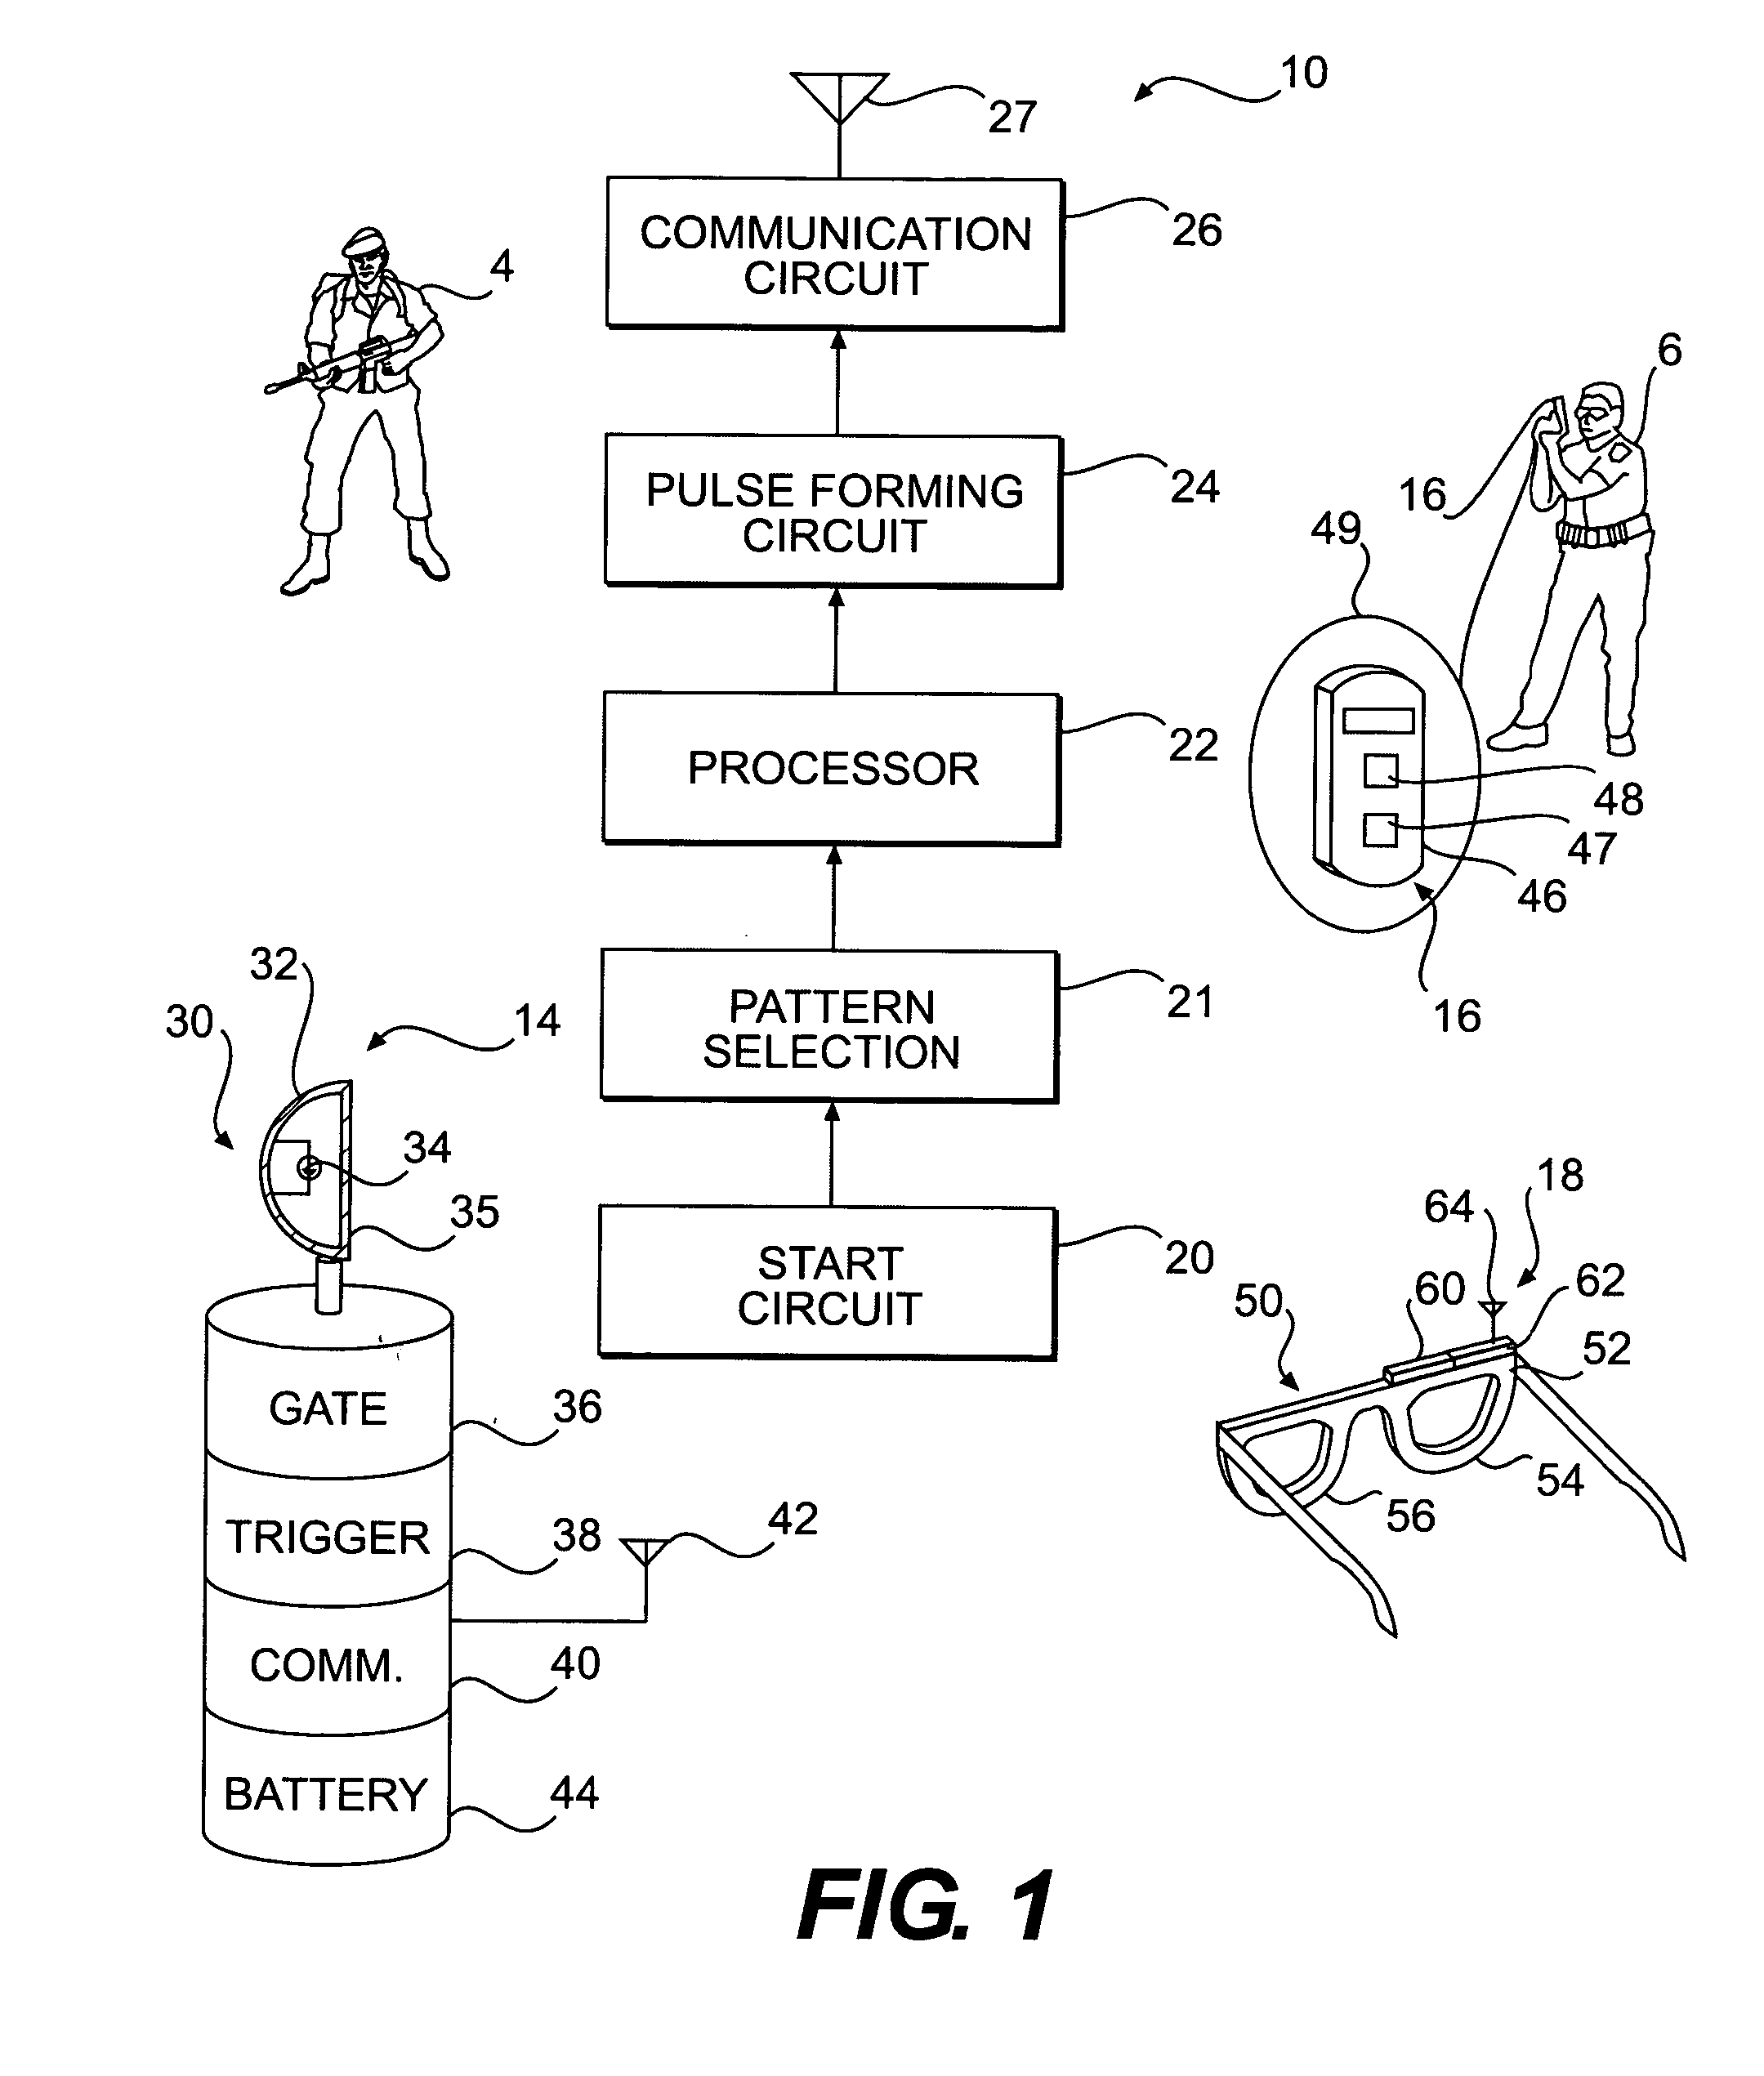 High intensity photic stimulation system with protection of users